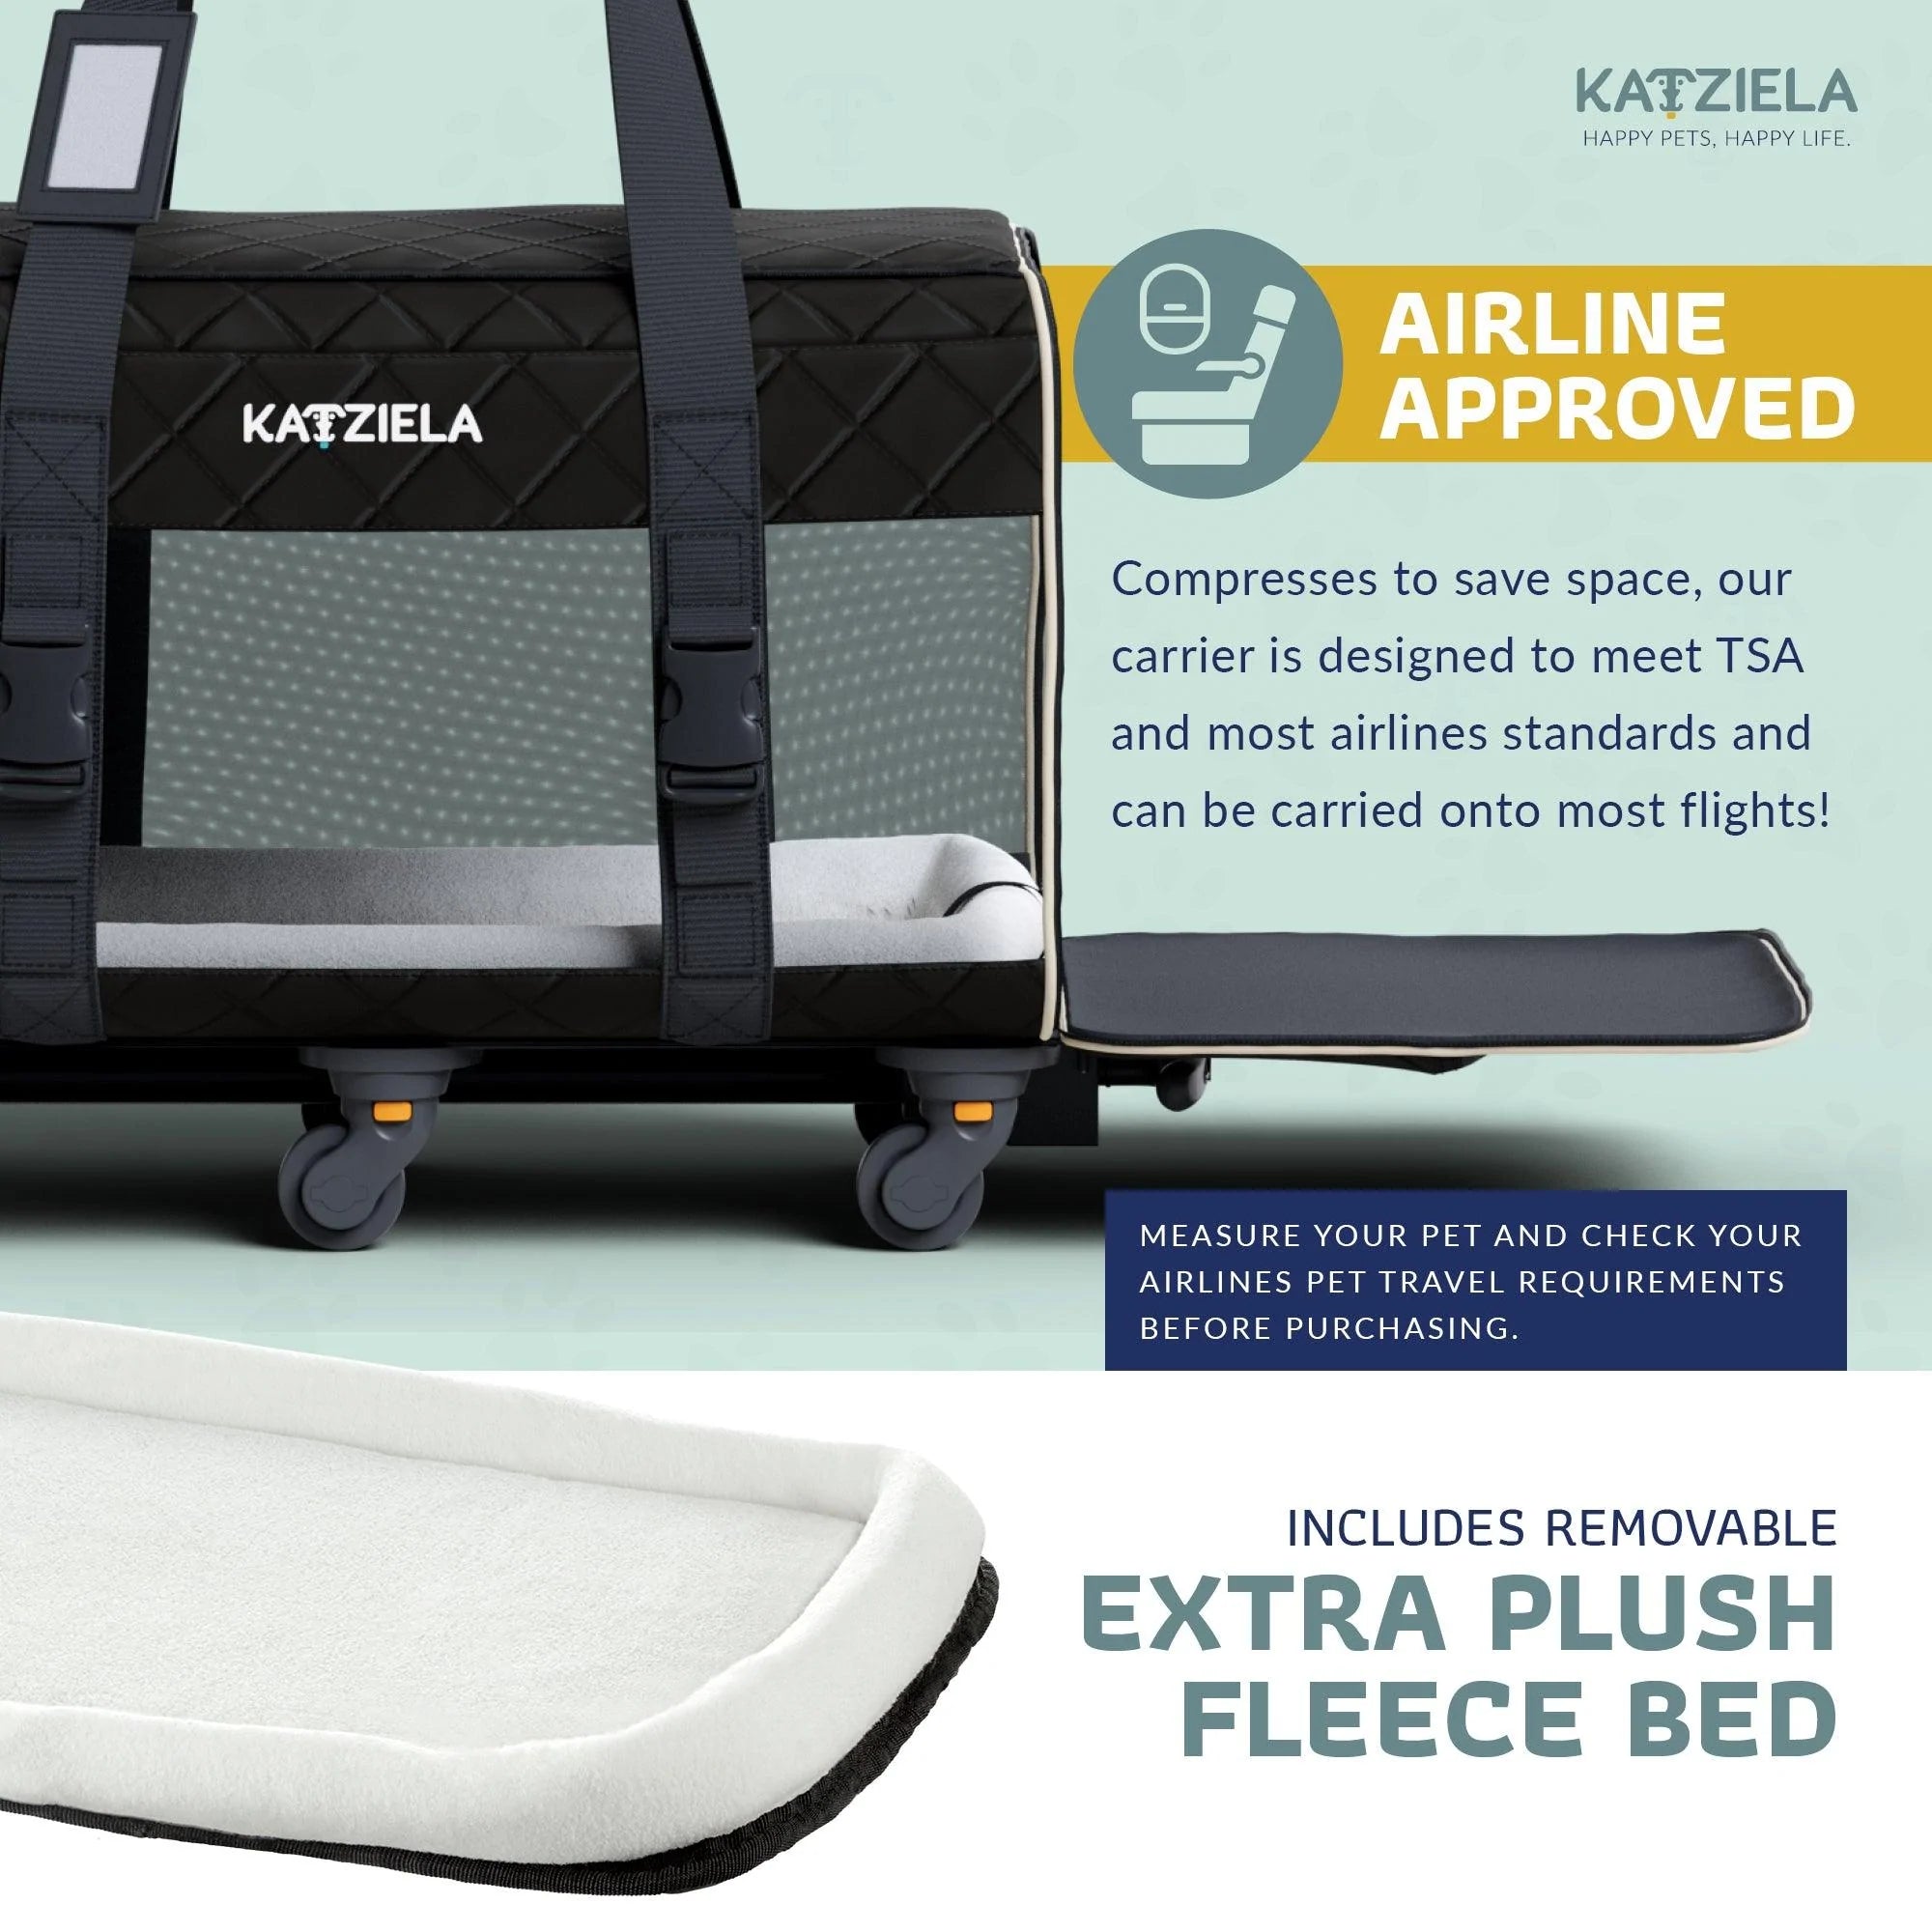 Katziela Rolling Pet Carrier Airline Approved - Pet Carrier with